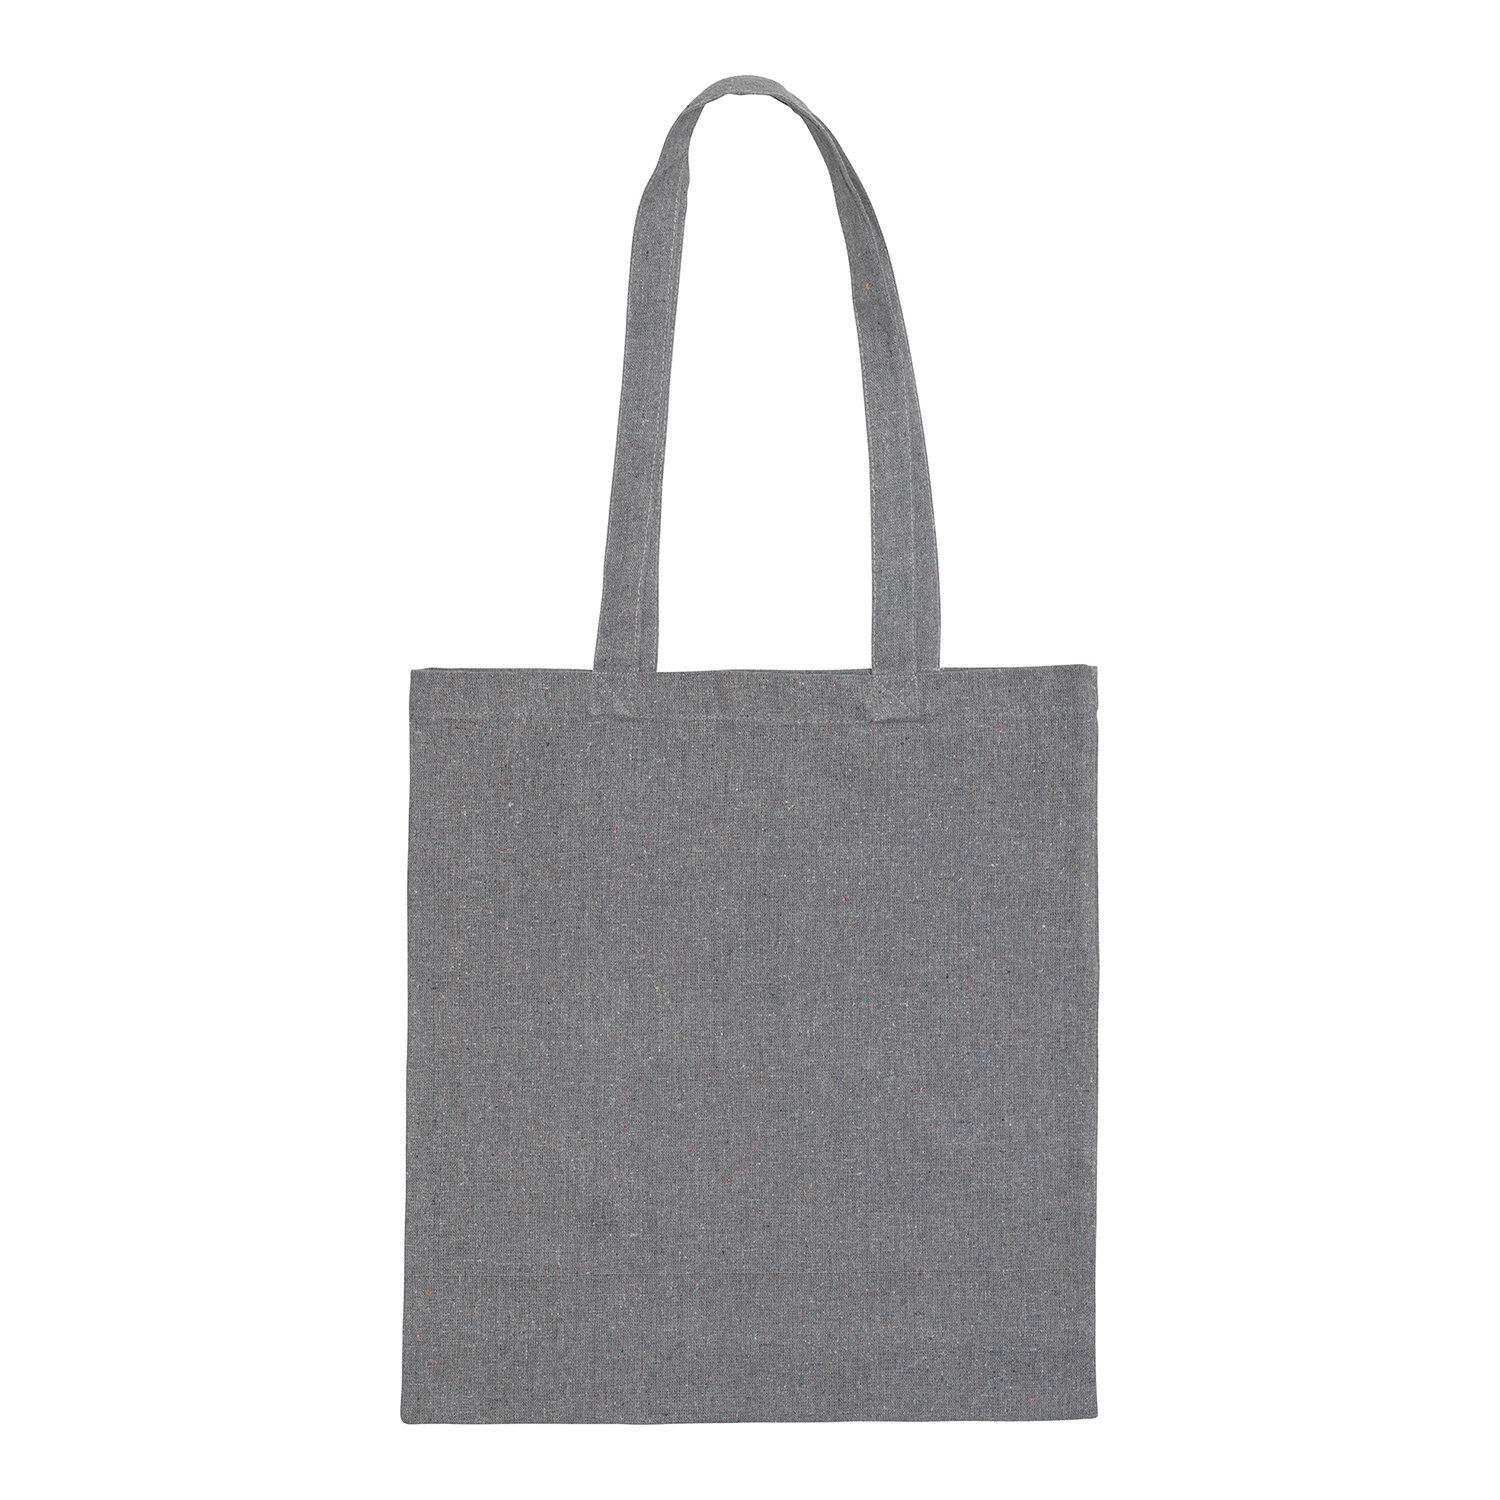 Newchurch Eco Recycled Cotton Shopper